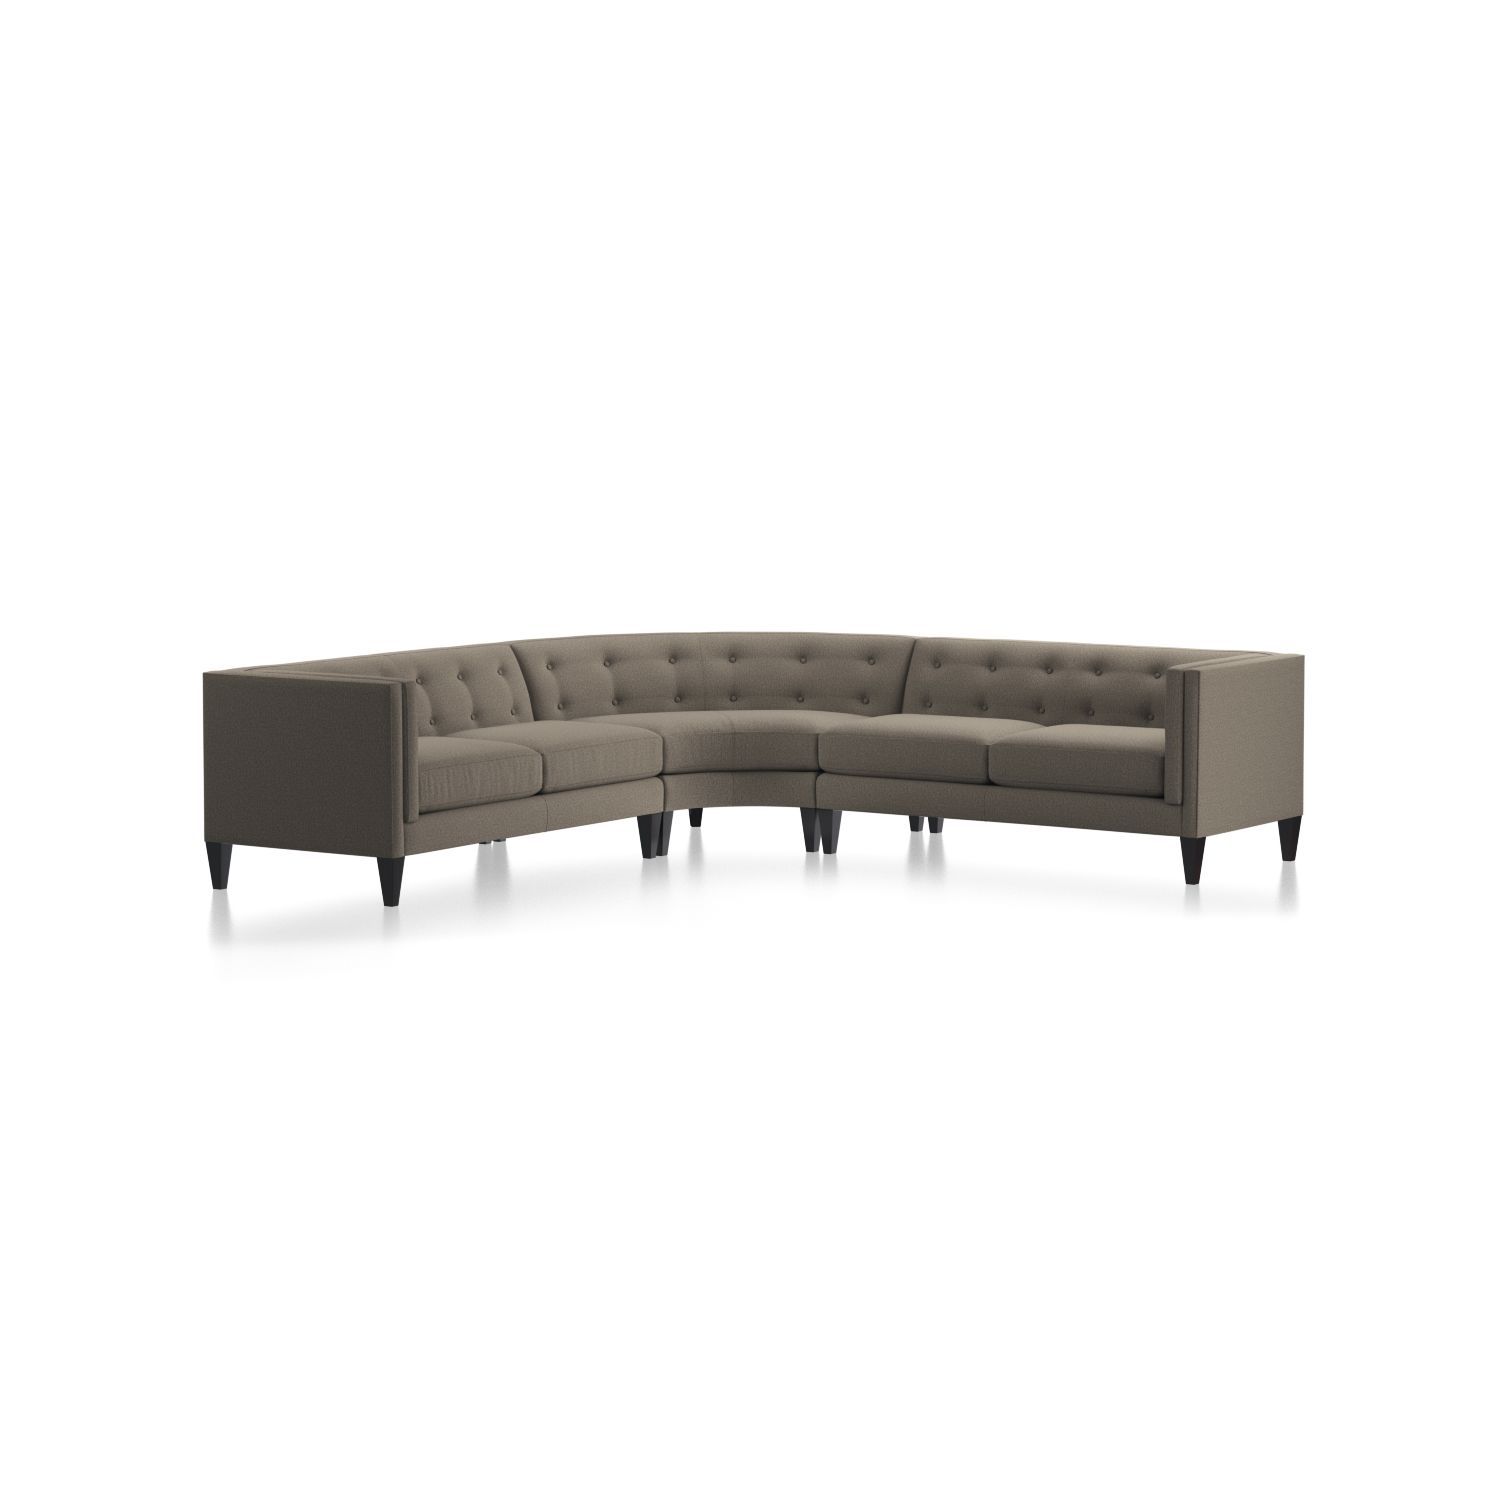 Aidan Grey 3 Piece Sectional Sofa + Reviews | Crate And Barrel With Aidan 4 Piece Sectionals (View 2 of 30)